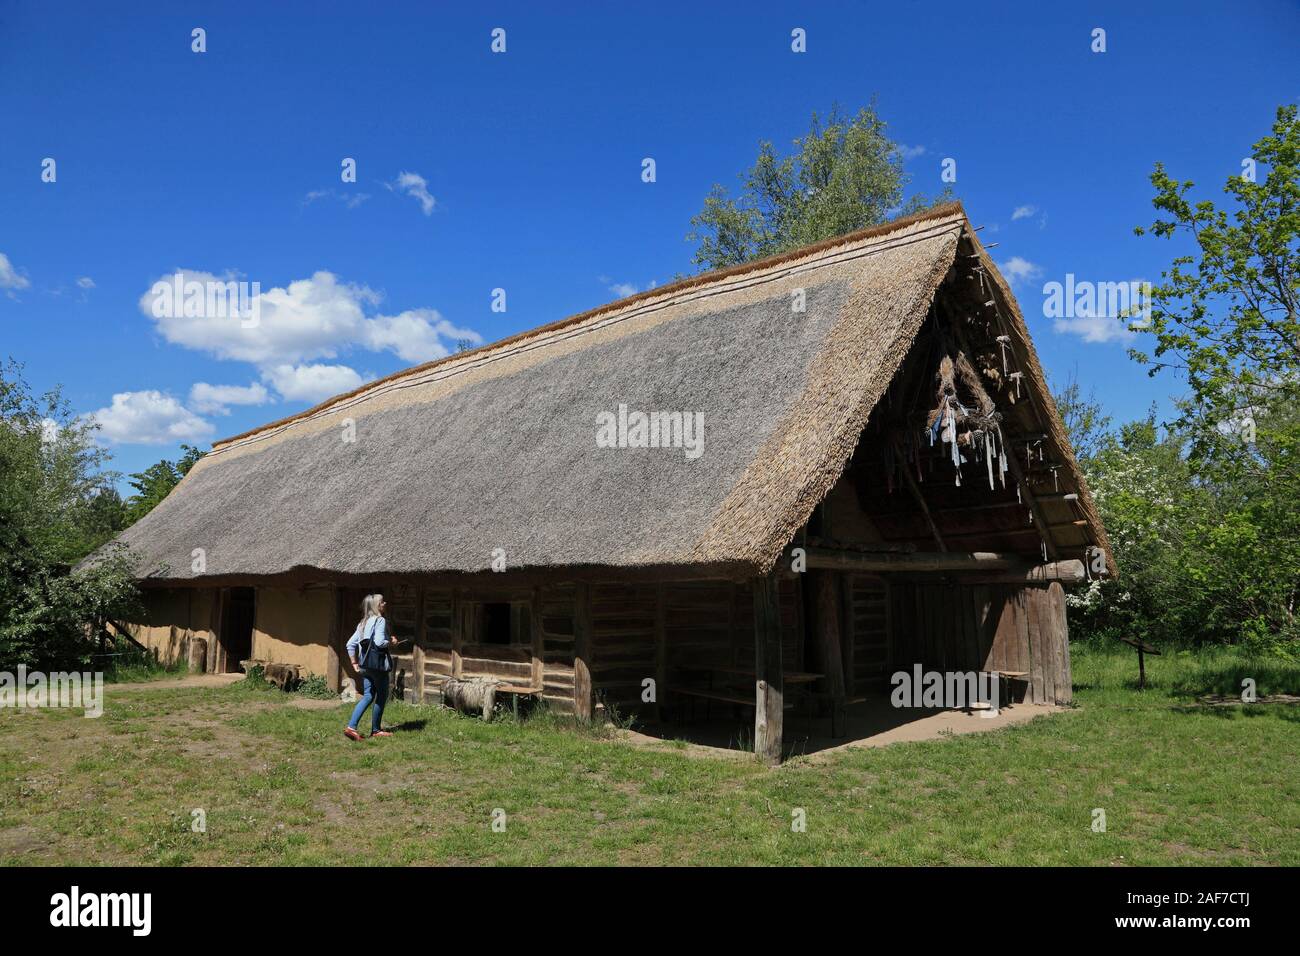 Long house in the Open air museum Archäologisches Zentrum, Hitzacker / Elbe, Lower Saxony, Germany Stock Photo